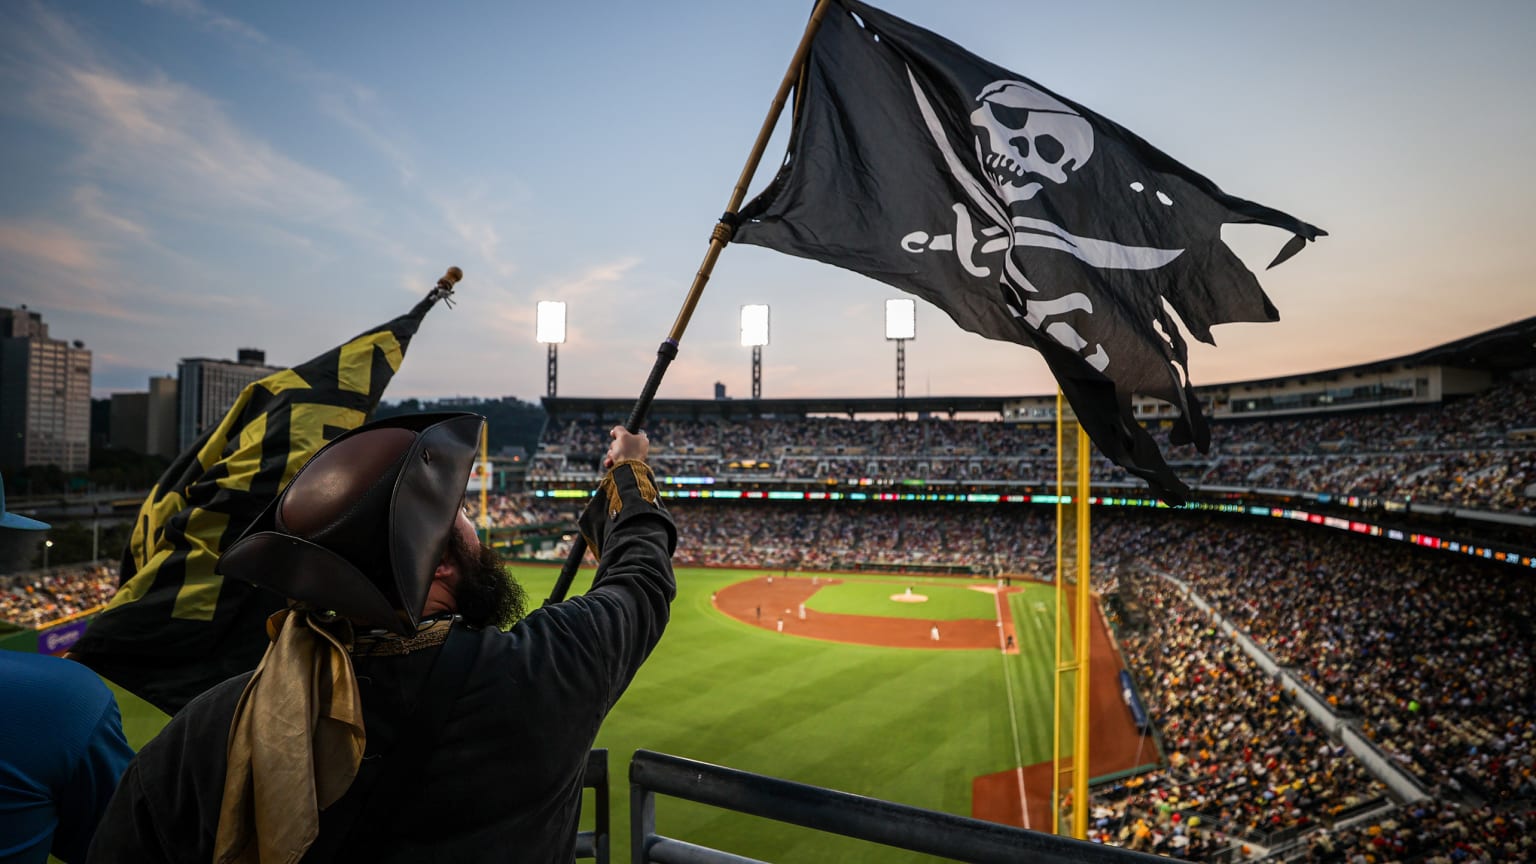 Pirates fan stories I: What perks lure season-ticket holders to